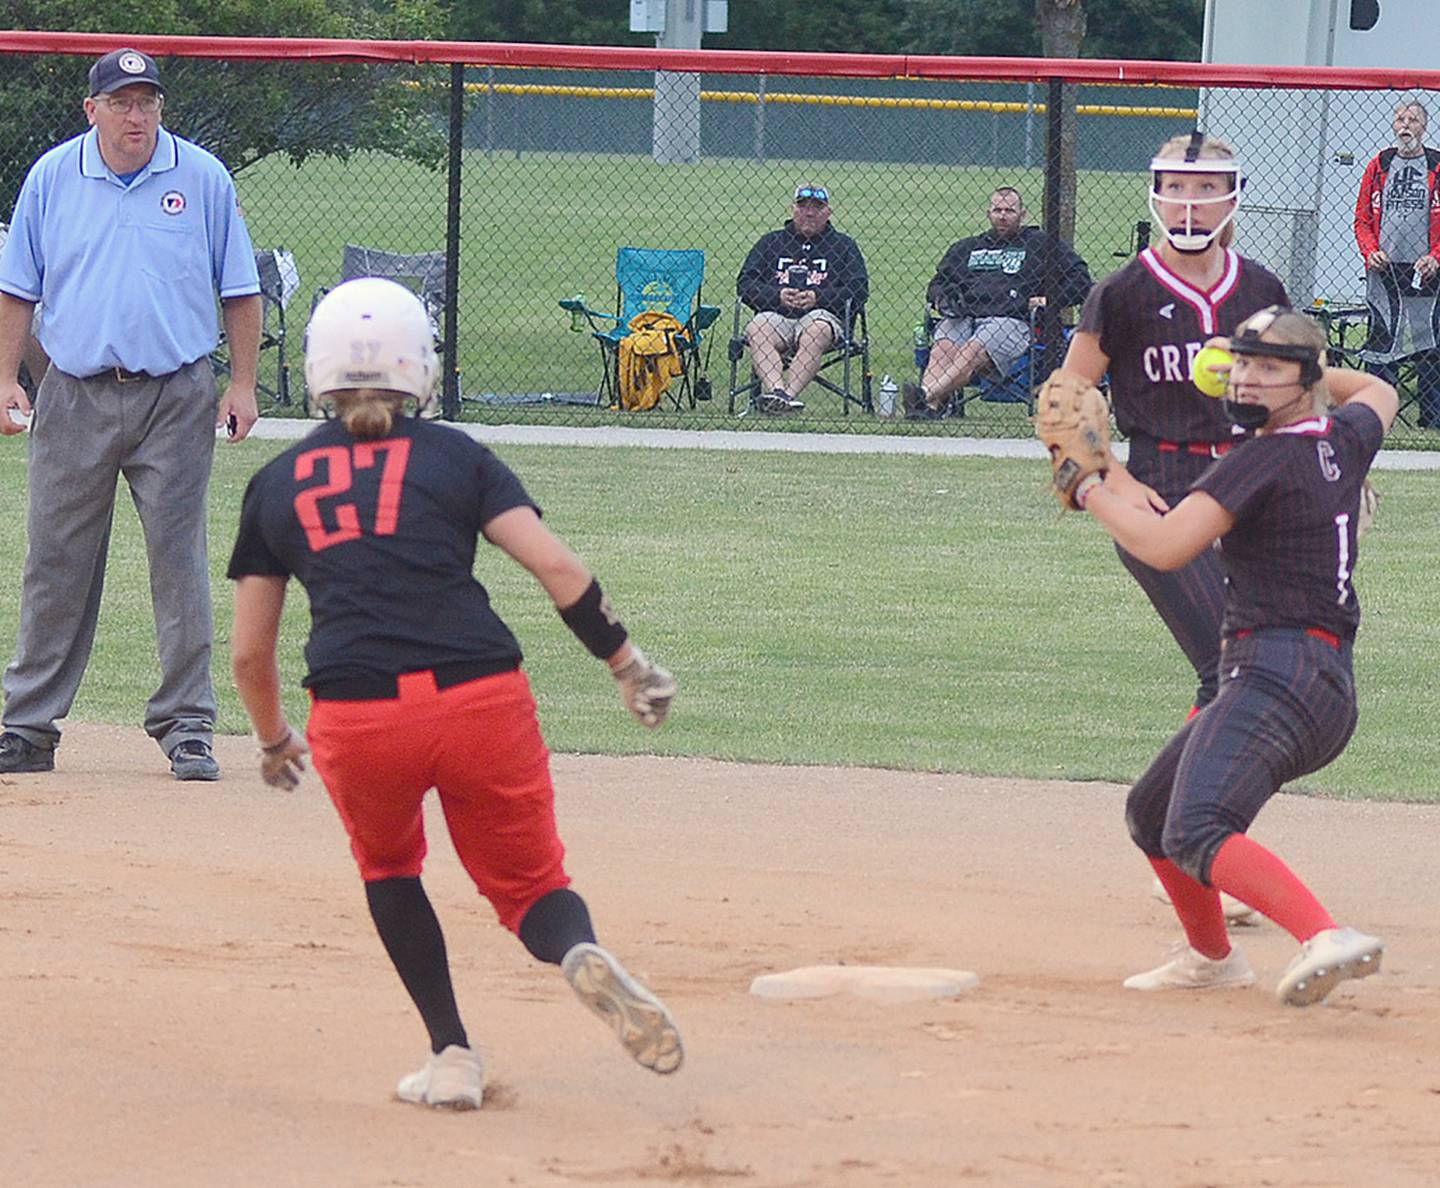 Creston second baseman Sophie Hagle throws to first base to complete a double play after receiving a toss from shortstop Avery Staver (behind Hagle) during Saturday's 6-5 win over Earlham. Hagle had a game-tying hit with two outs in the eighth inning to send the game to the ninth inning.